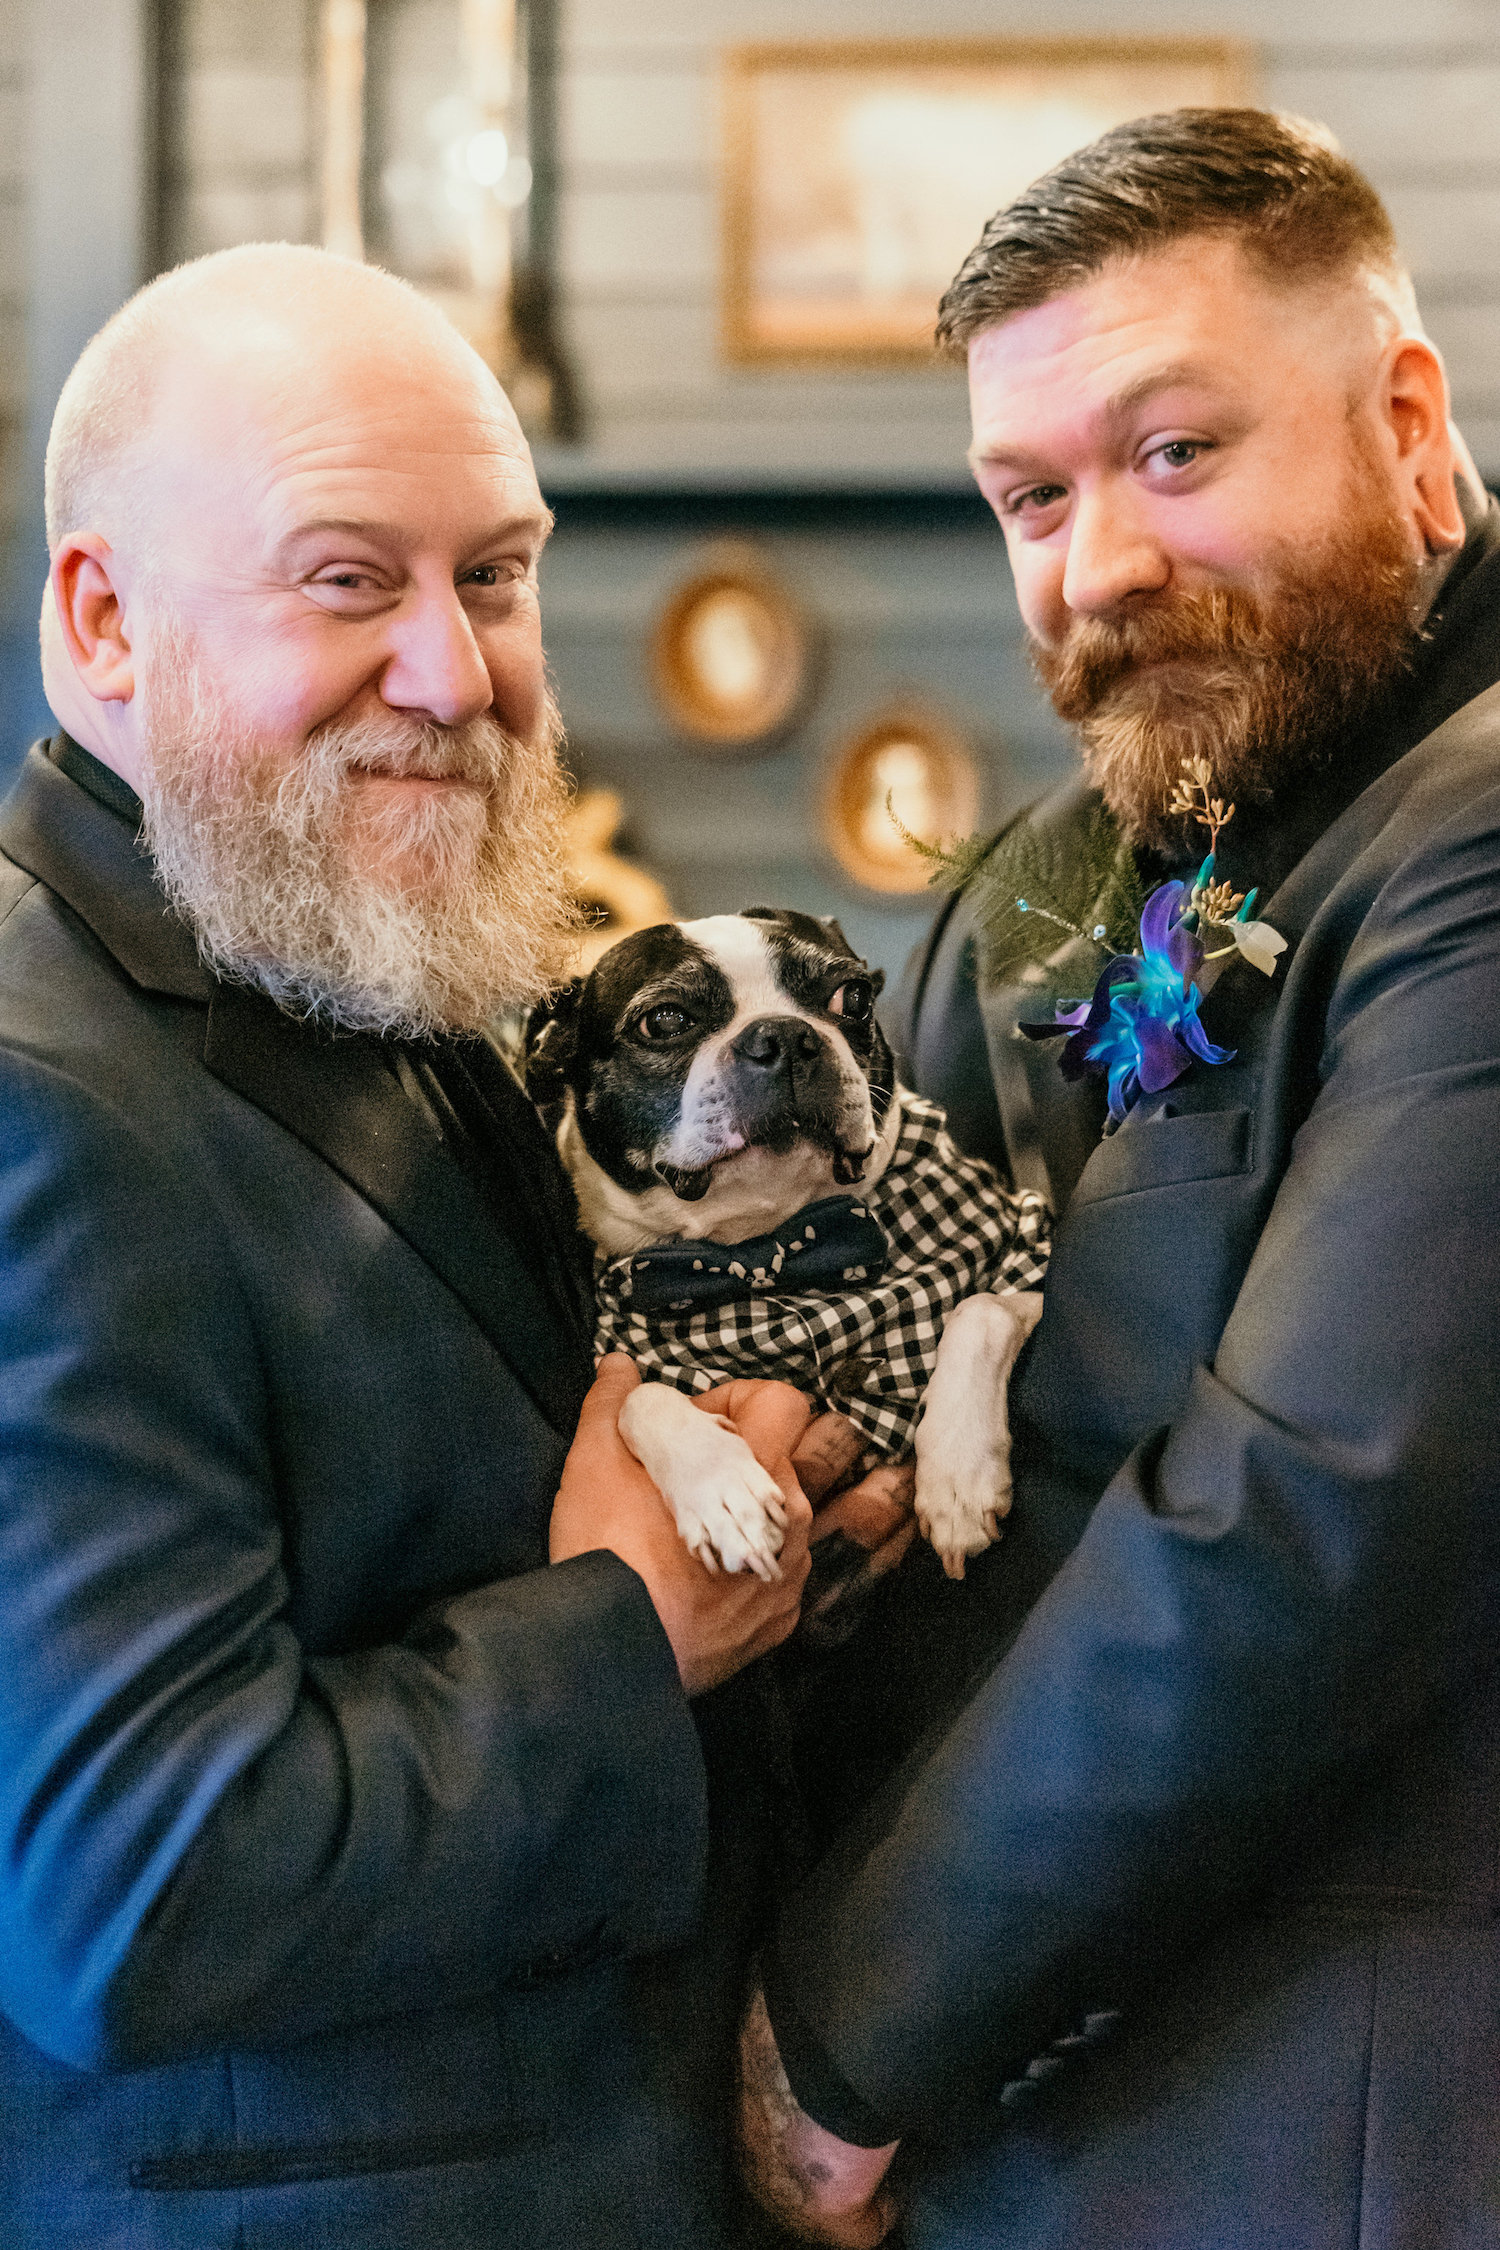 Same Sex Tampa Gay Grooms with French Bulldog in Tuxedos Wedding Portrait